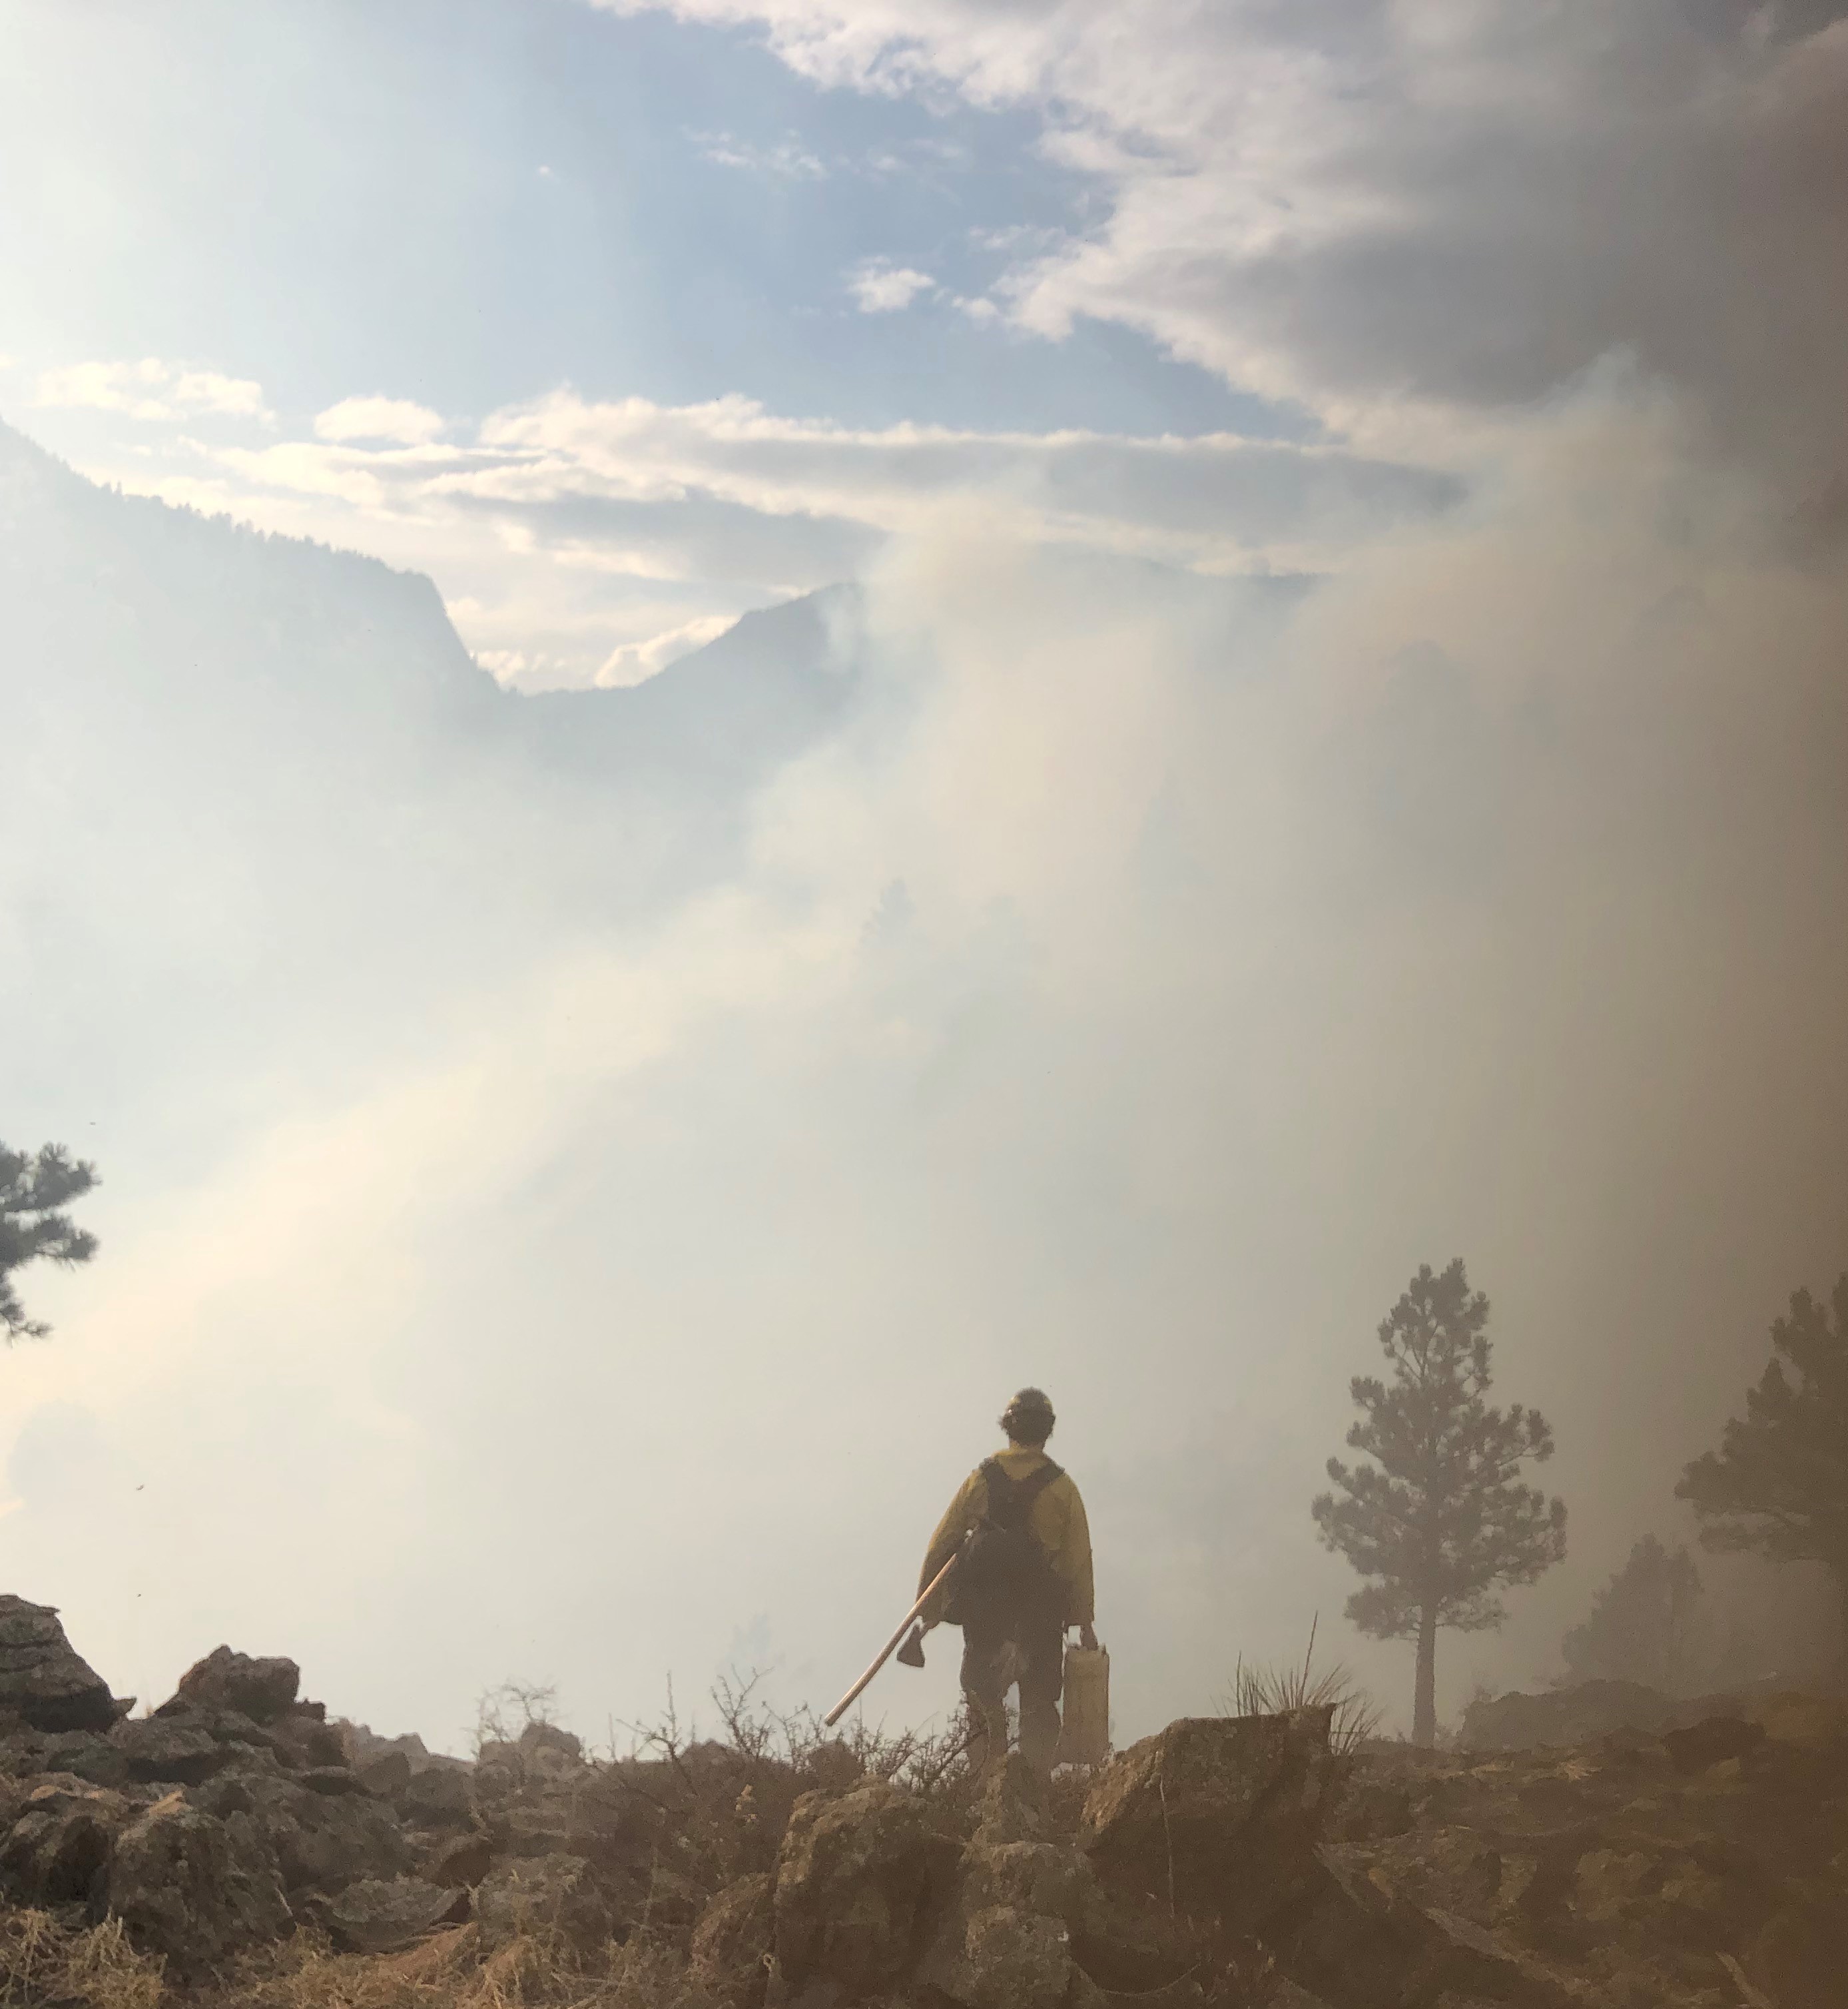 Photo of a wildfire burning in the valley. A firefighter stands at the rocky edge of the mountain, overlooking the burn site as a blanket of thick gray smoke covers the valley. Barely visible through the smoke are the mountain tops across the valley.